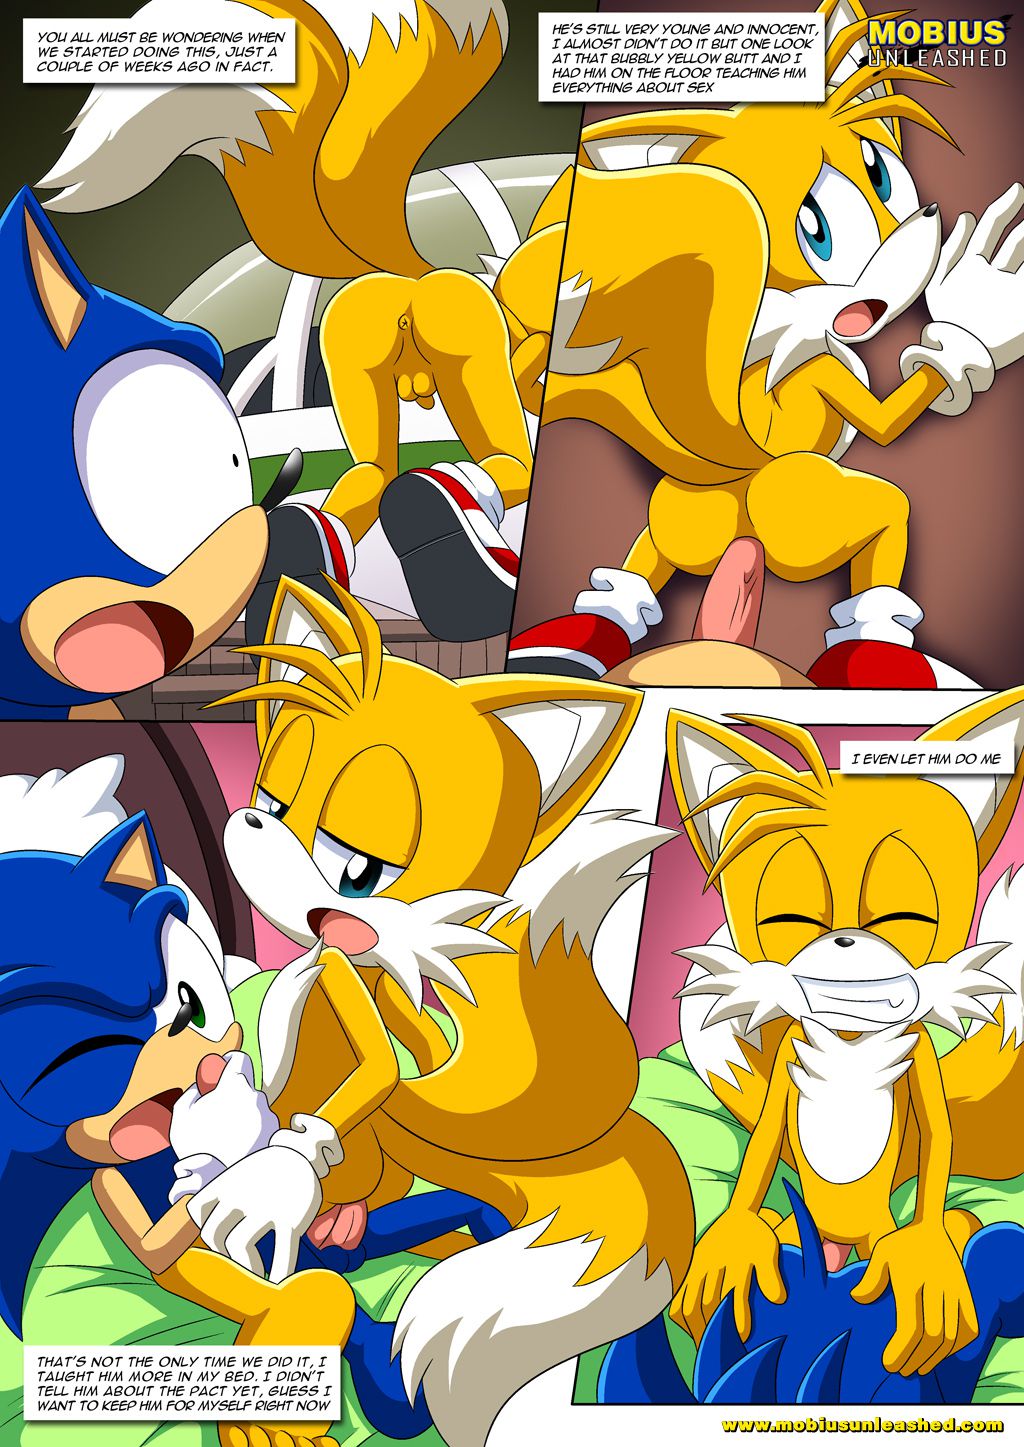 [Palcomix] The Pact 2 (Sonic The Hedgehog) [Ongoing] 3